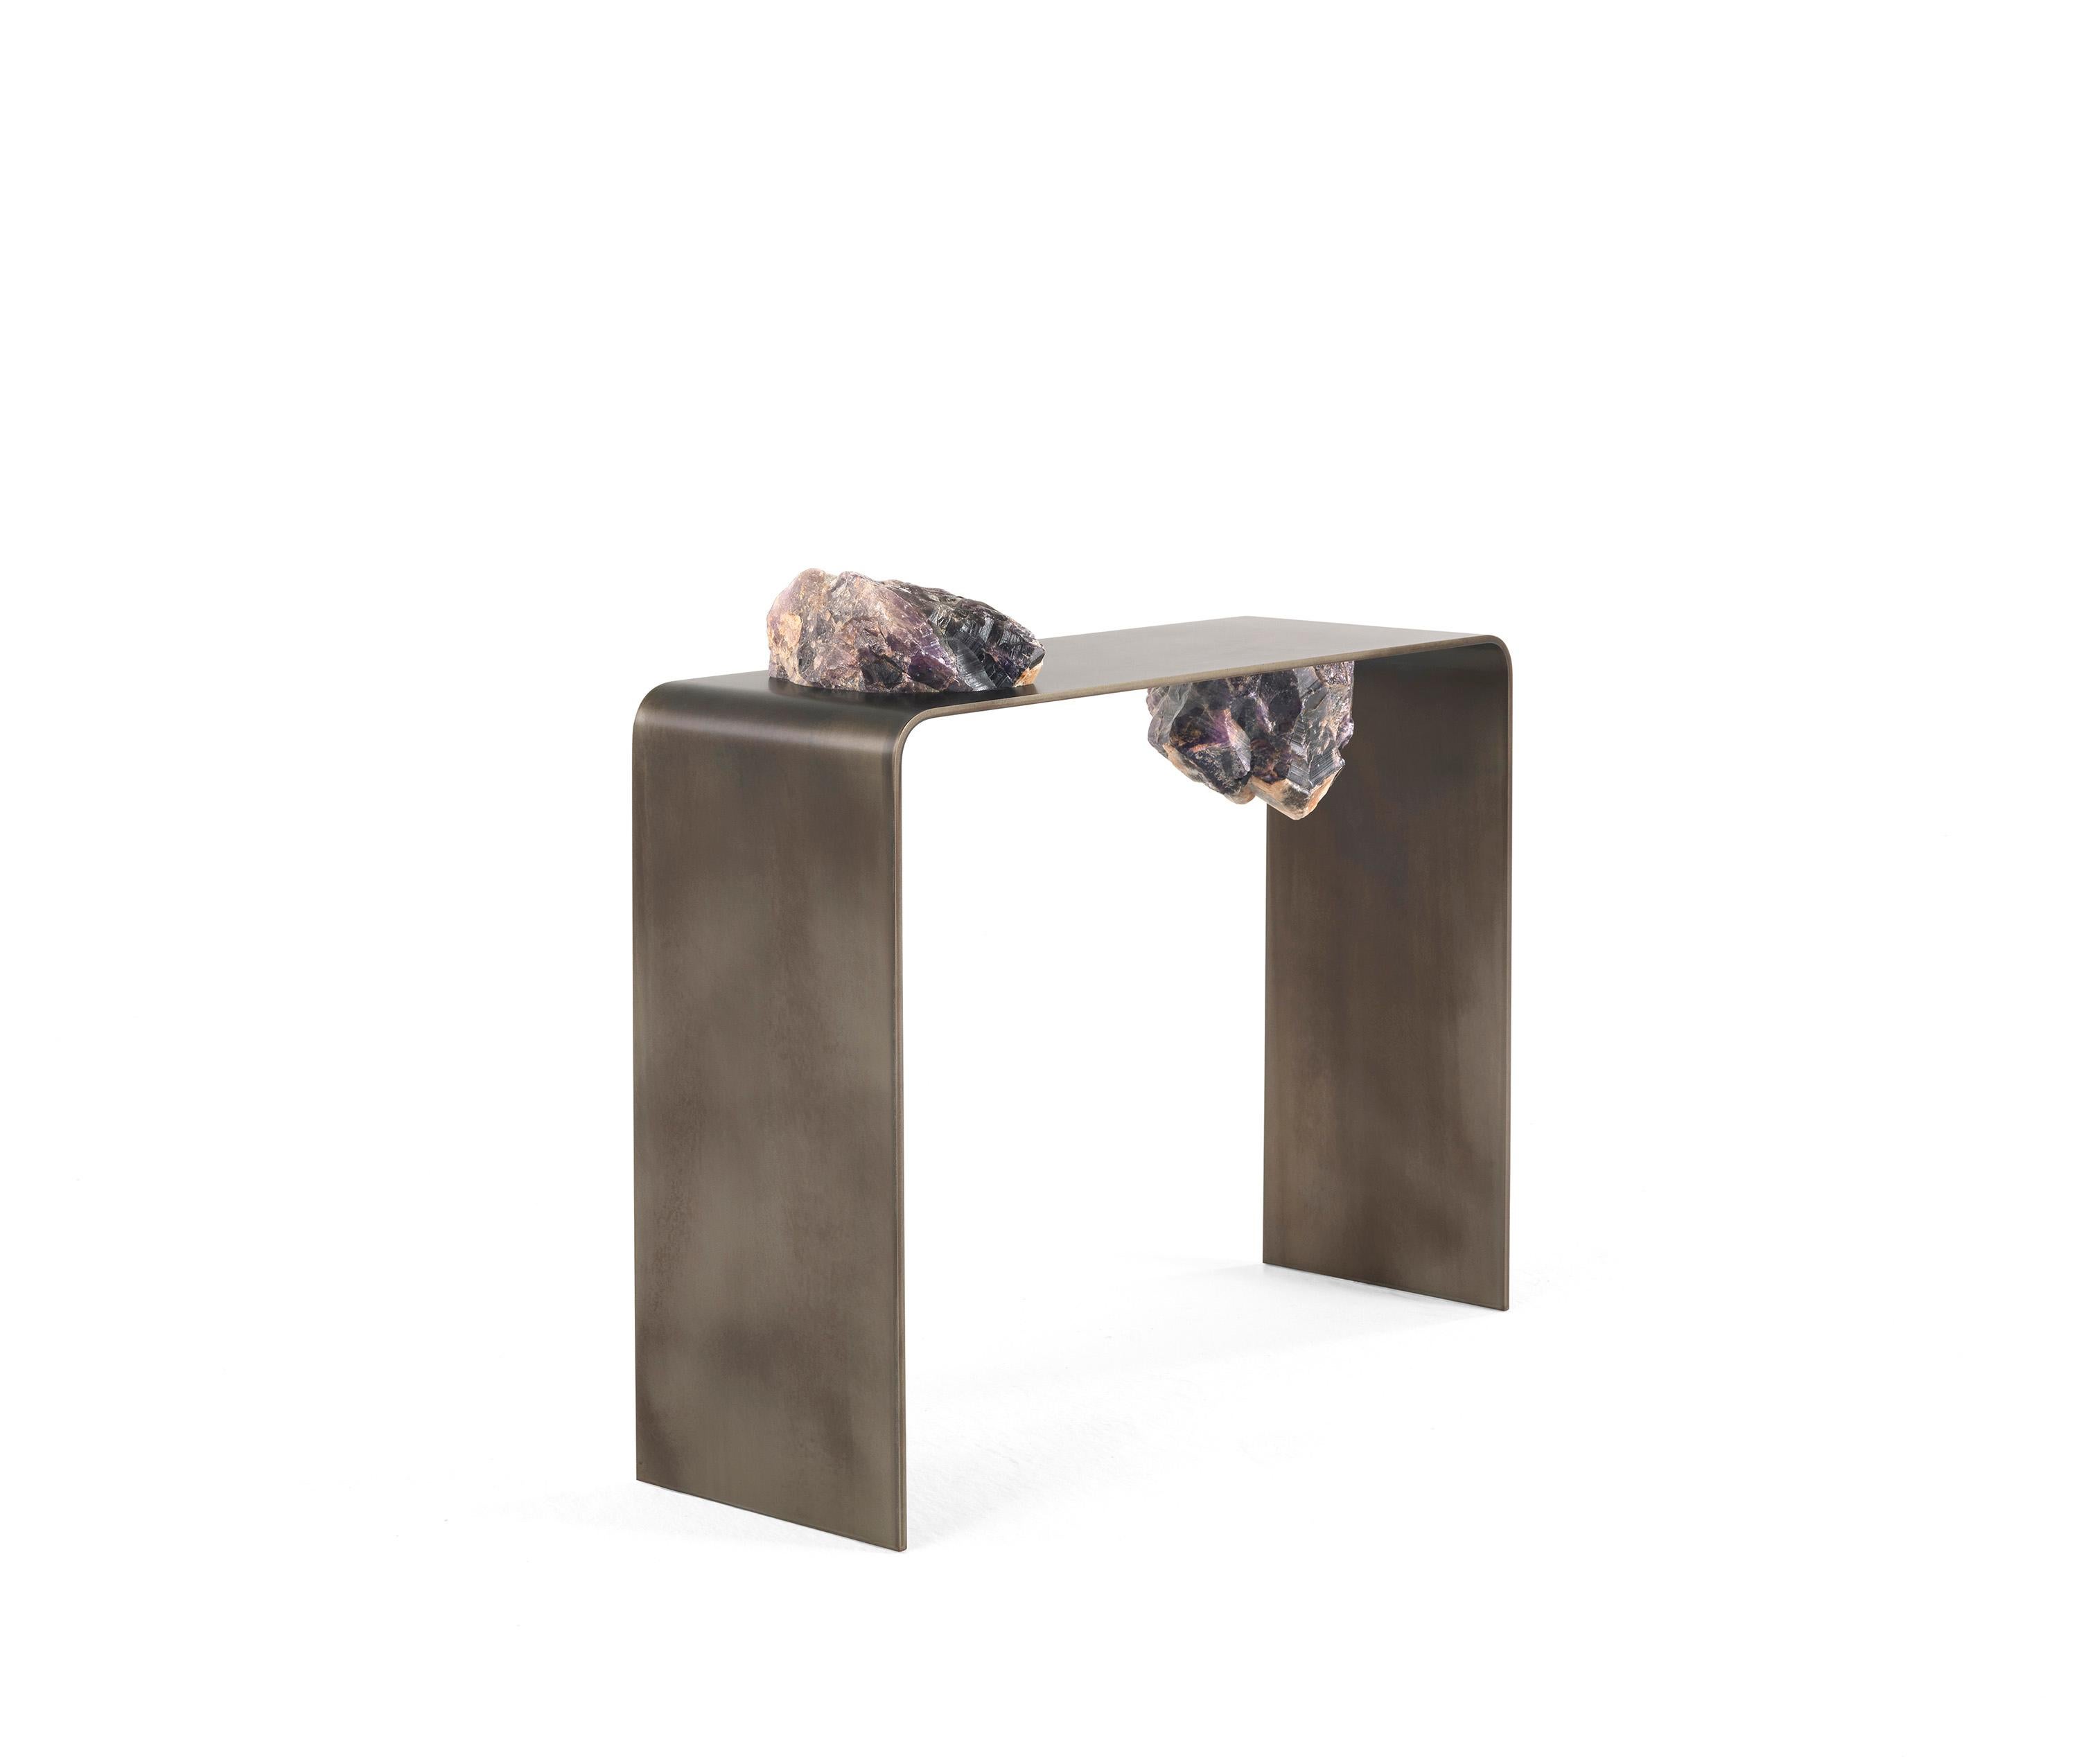 Agment console by CTRLZAK
Materials: Metal structure in bronze finishing with manganese salt treatment. Stone elements in raw Labradorite
Dimensions: 100 x 30 x 110 cm

A fragment from distant planets segmented in two parts.
A separate entity